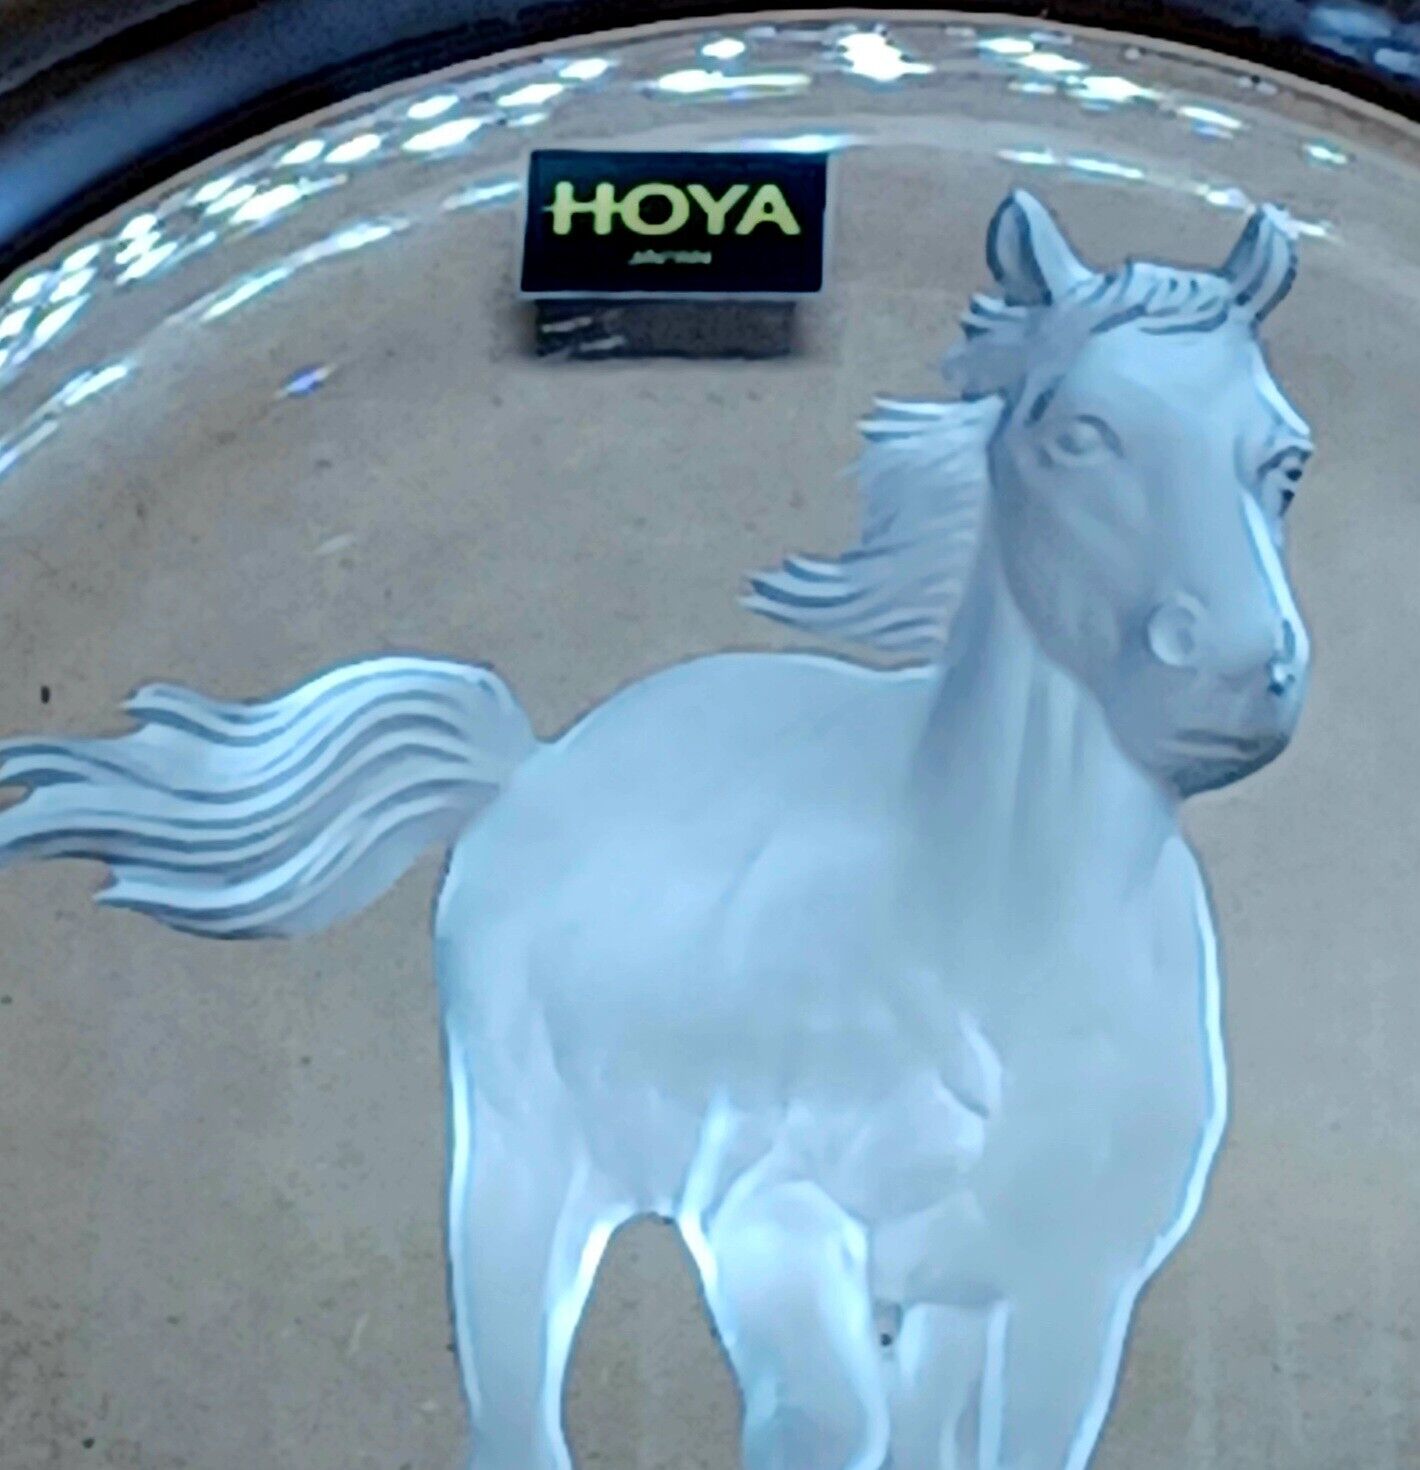 Hoya Deep Relief Crystal Running Horse Wine Bottle Coaster Dresser/Tray -Awesome